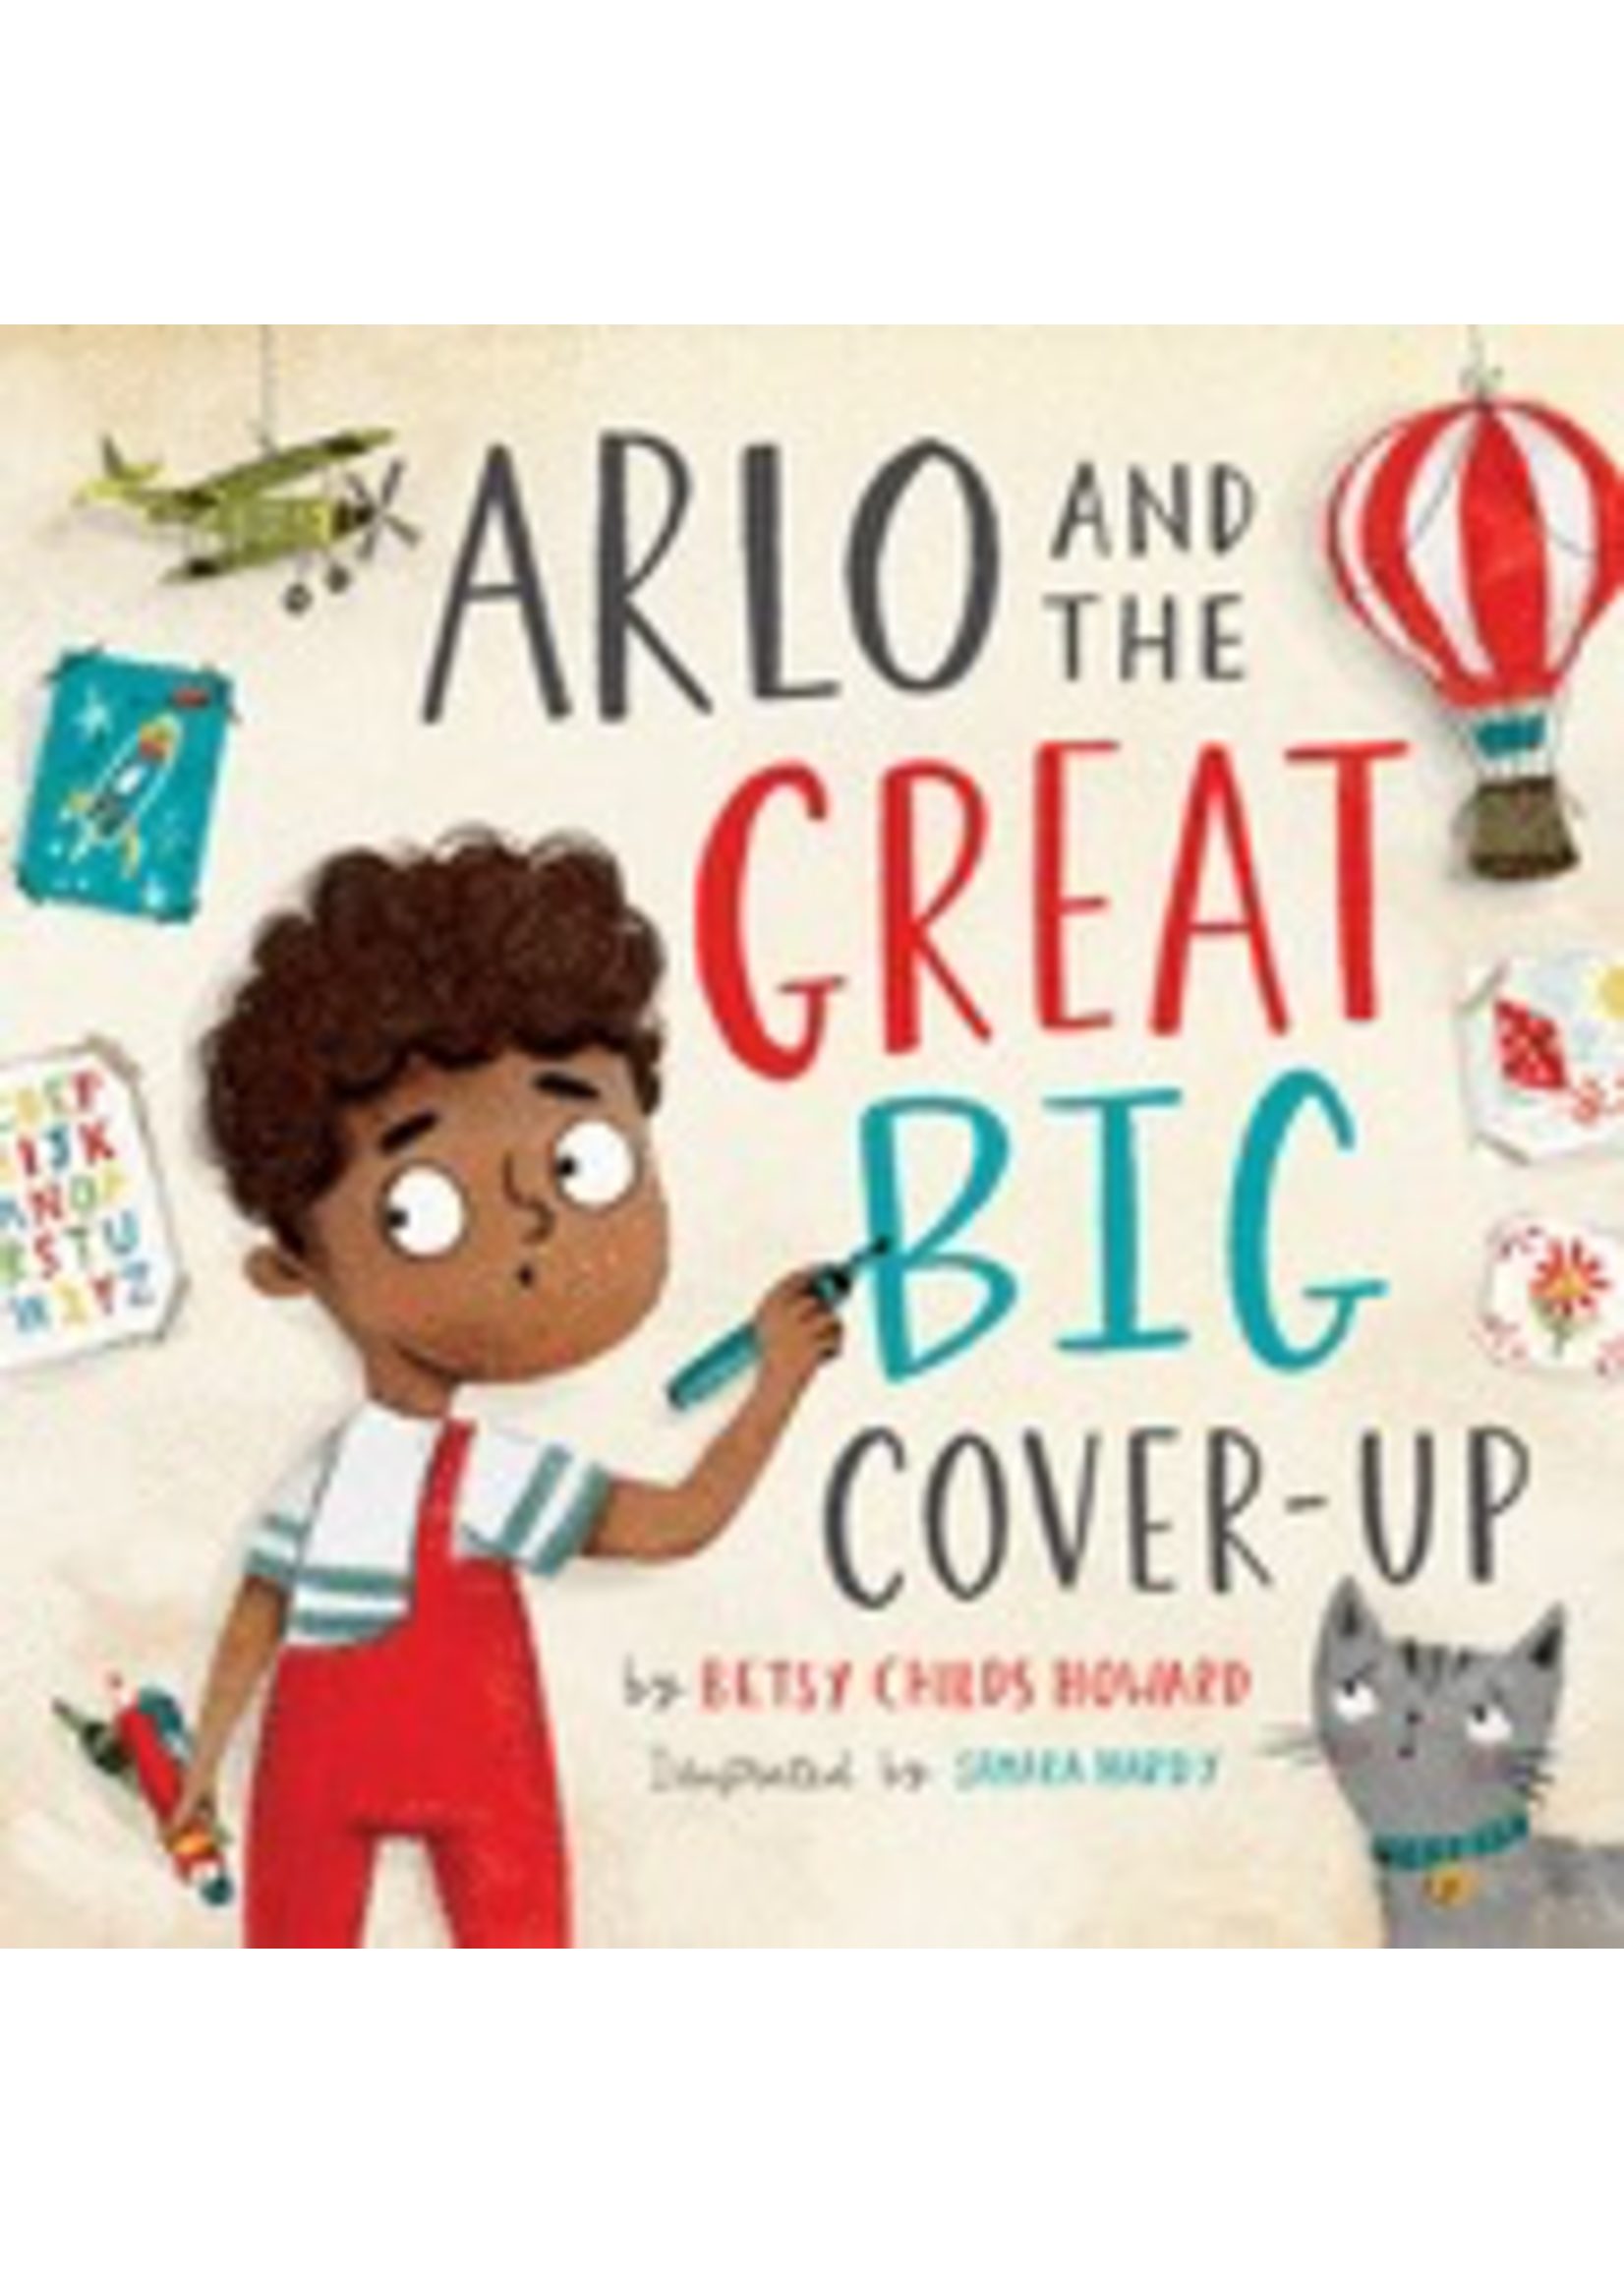 Arlo and the Great Big Cover-Up [Betsy Childs Howard & Samara Hardy]